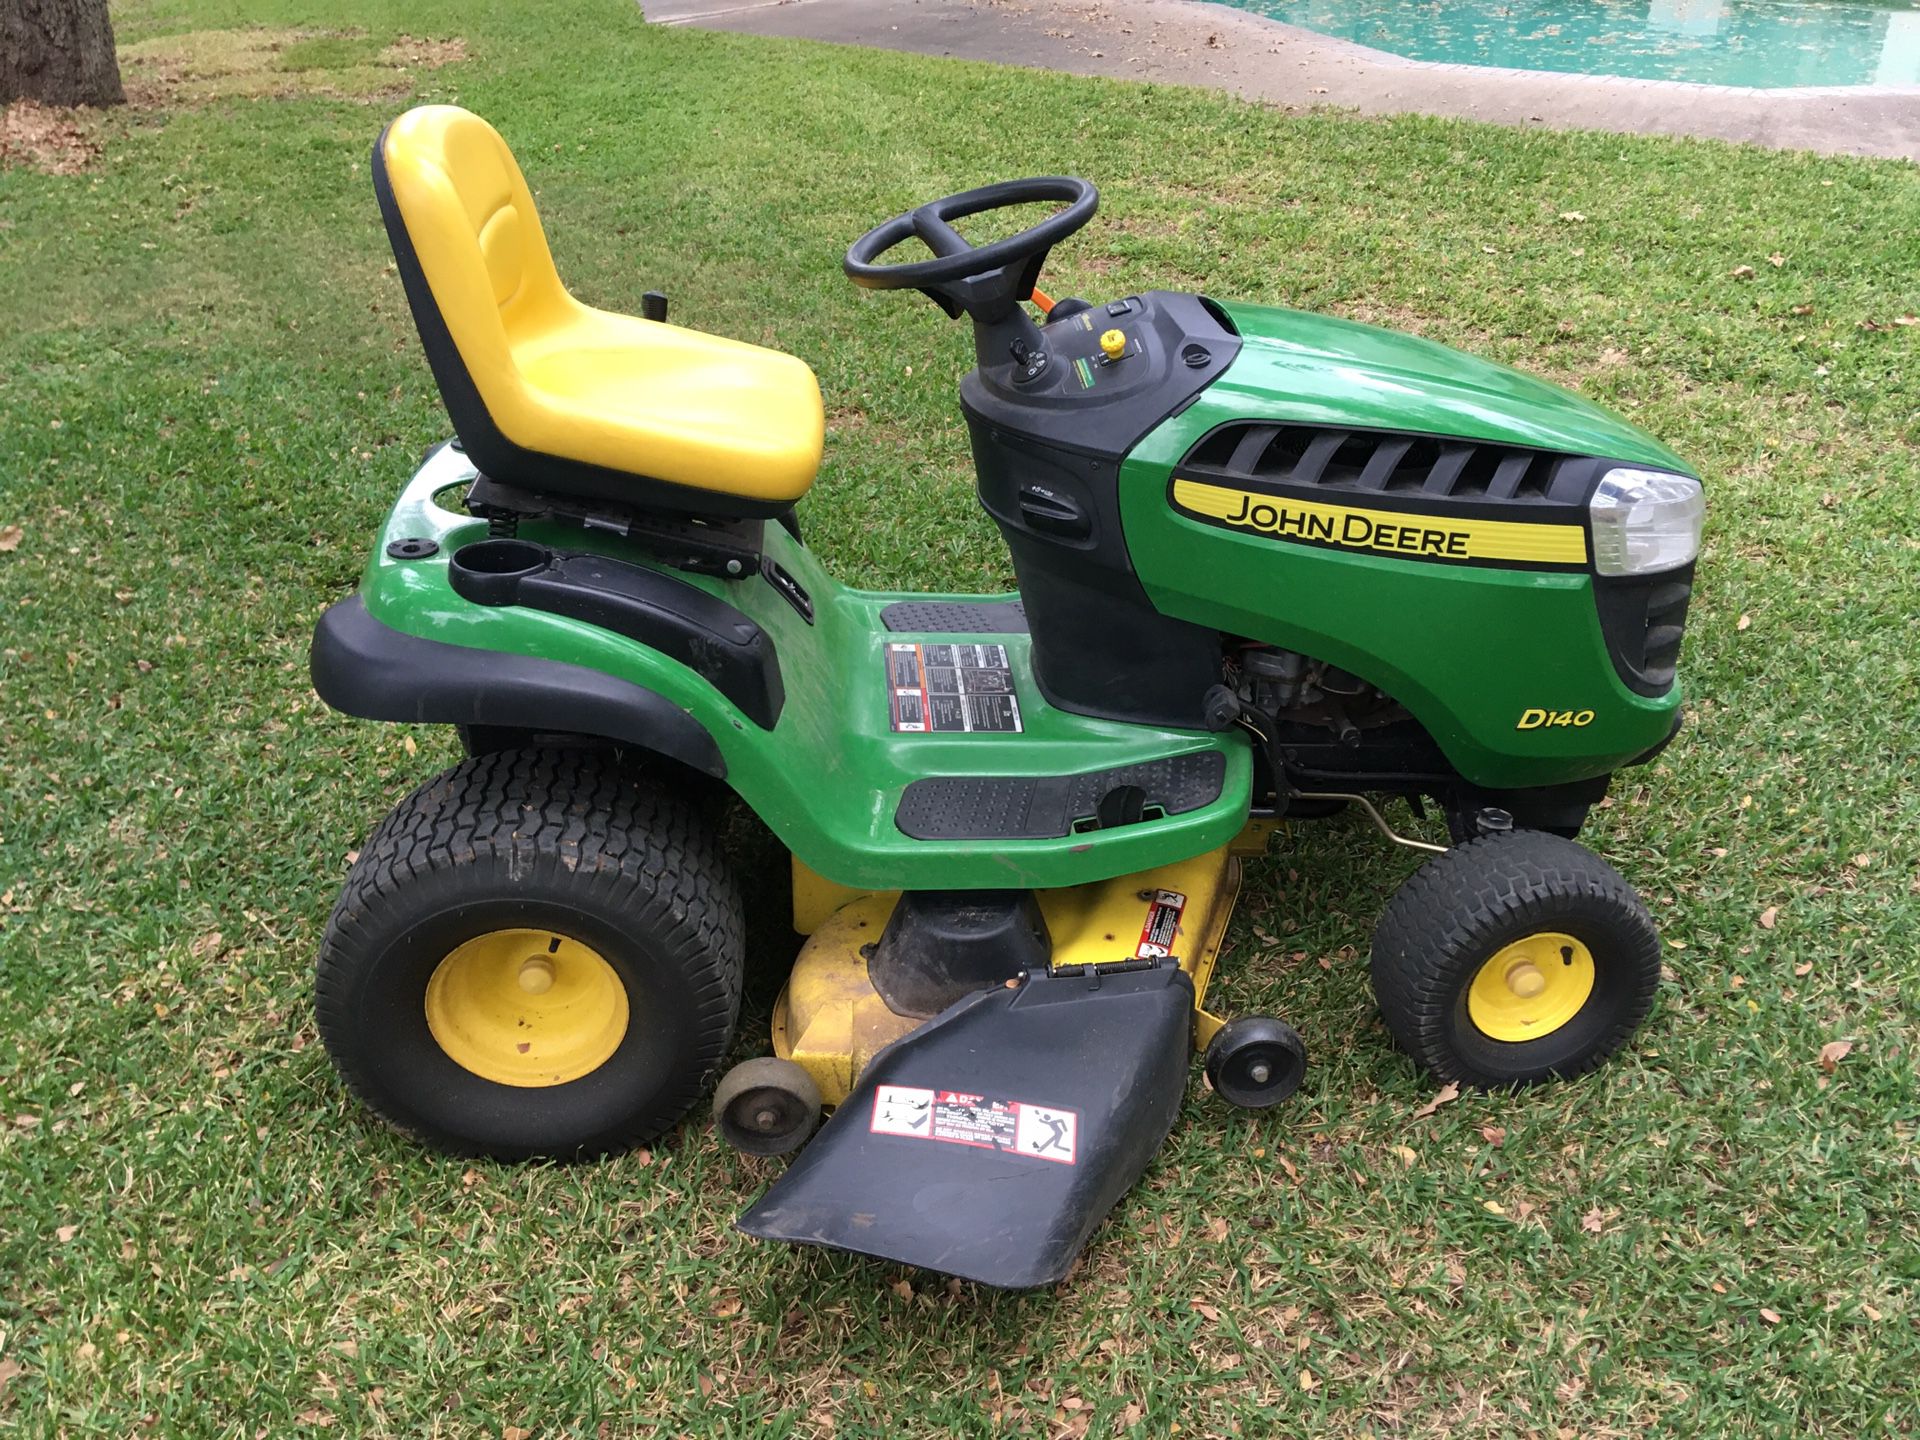 For Sale (or Trade) John Deere D140 Lawn Tractor Mower Low Hours